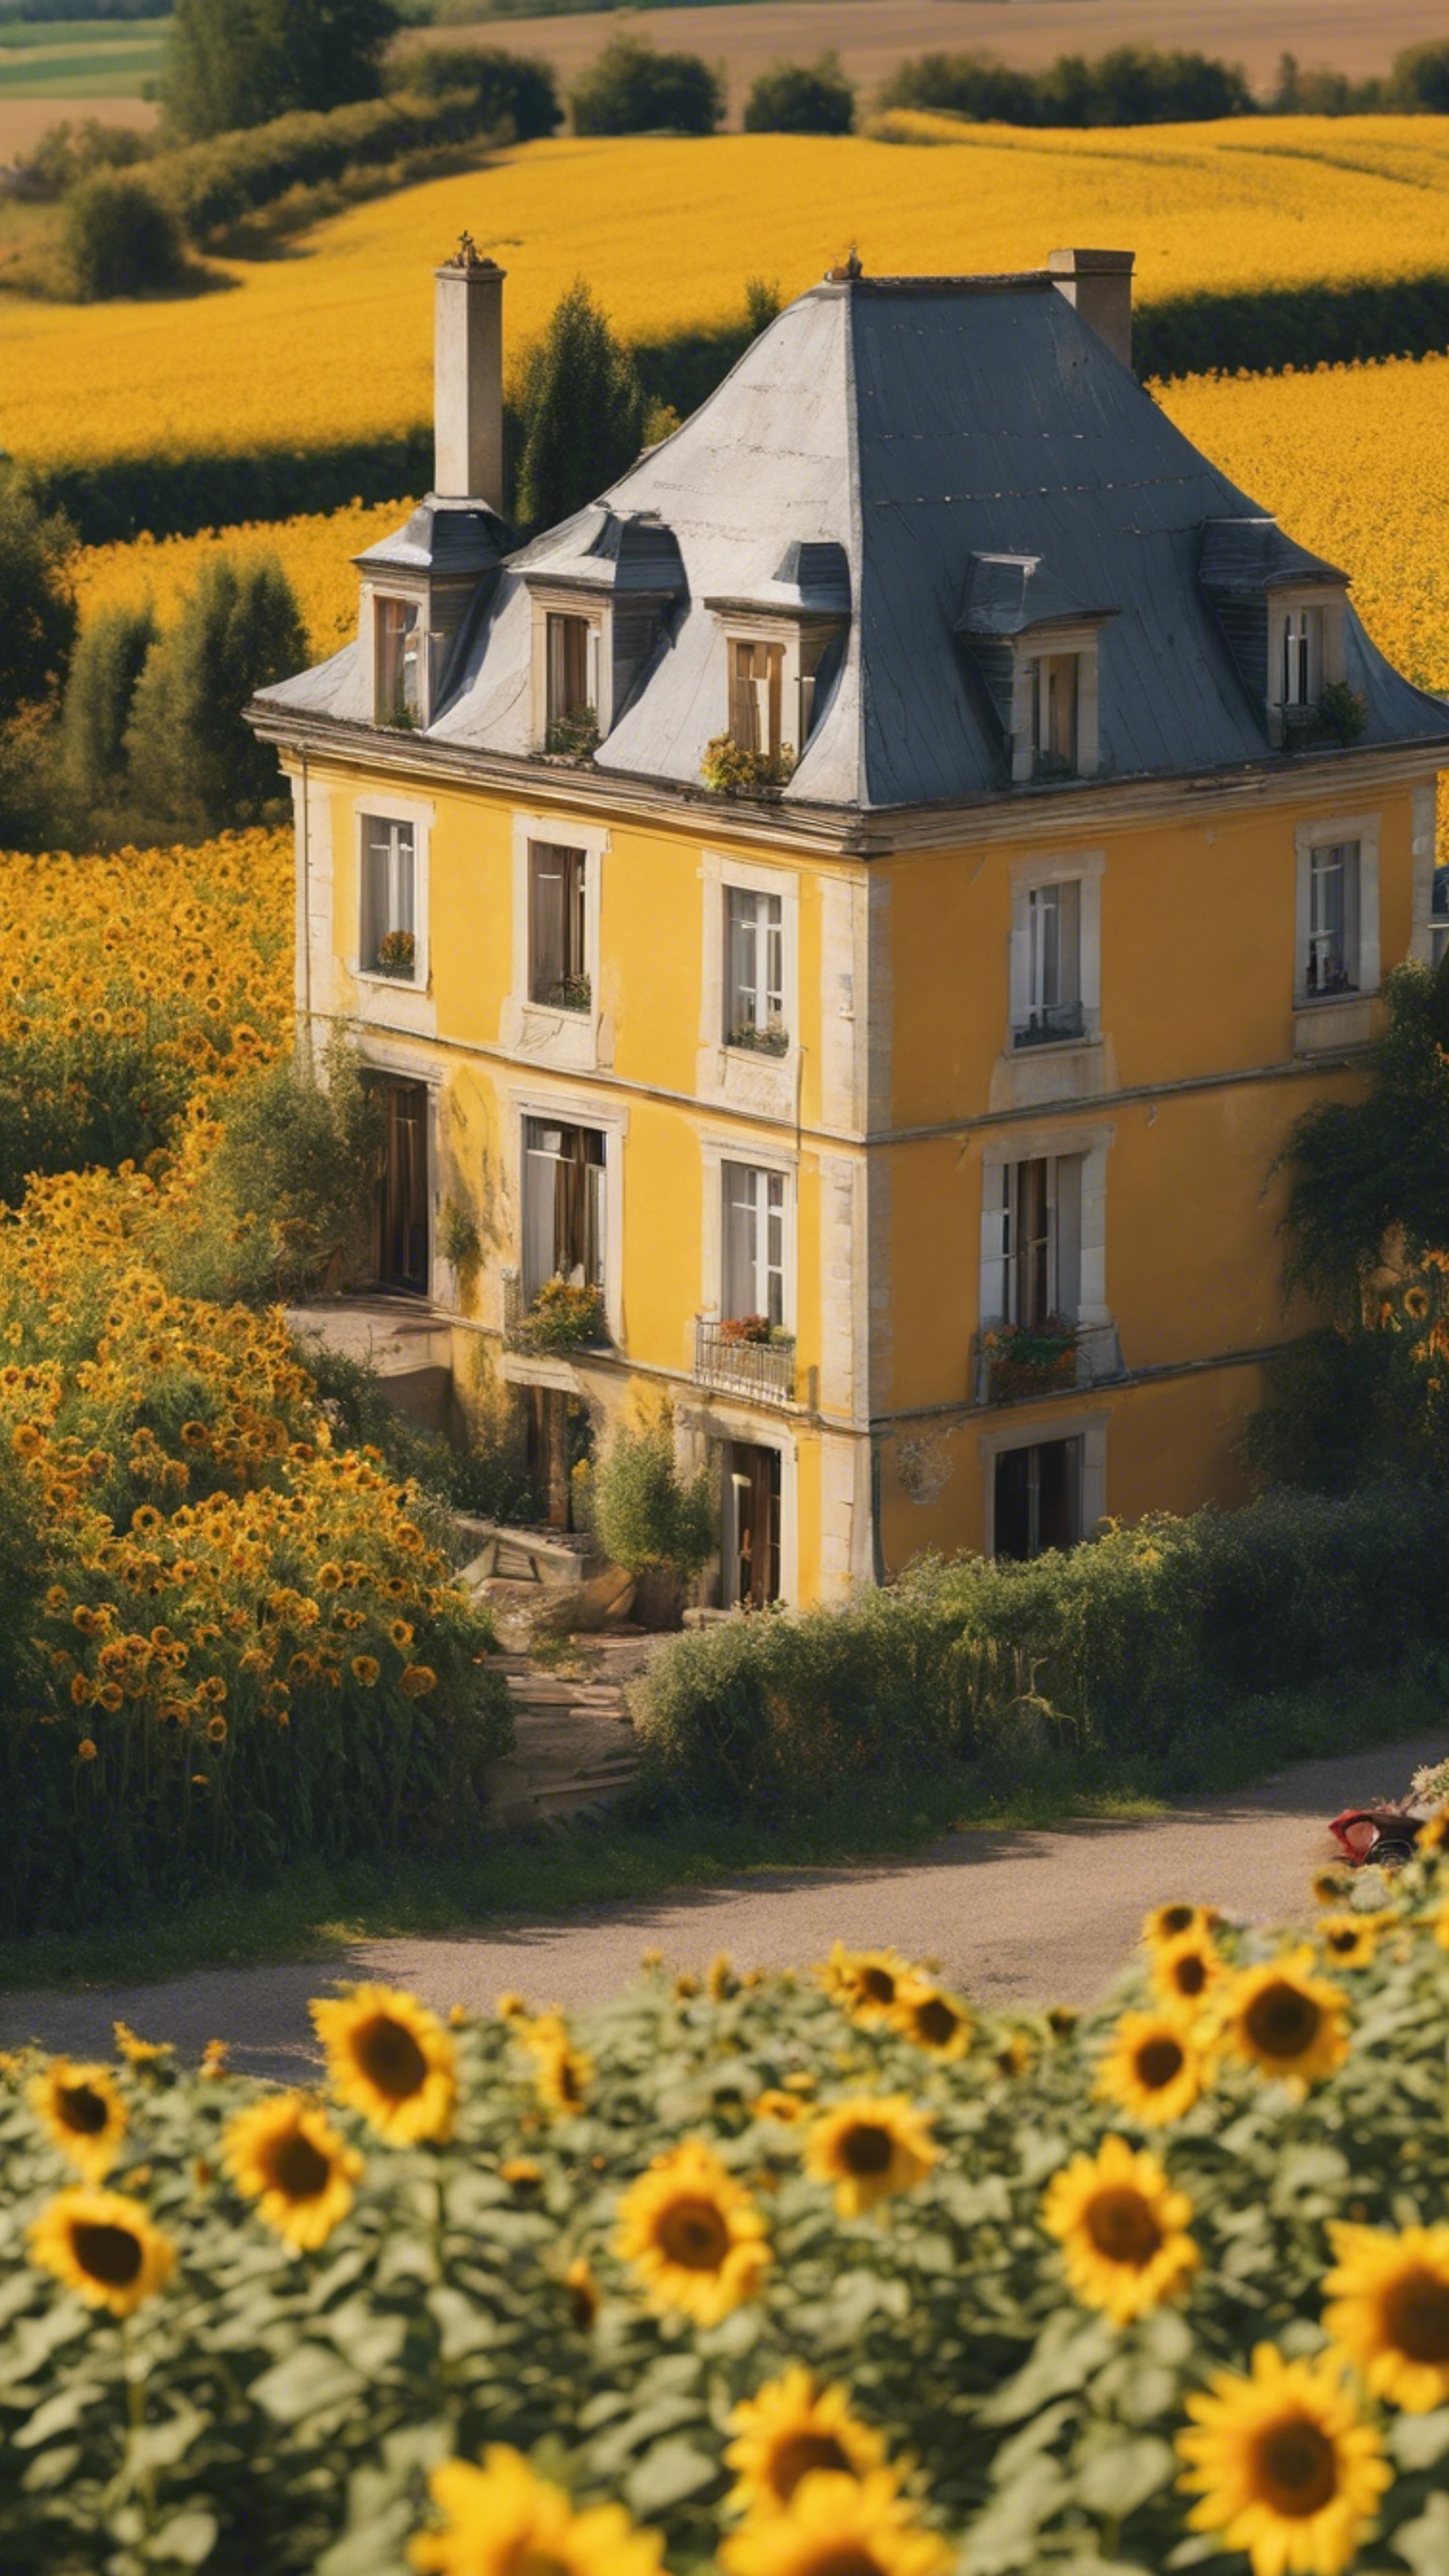 A quaint French country house nestled in a field of bright yellow sunflowers during a sunny afternoon. วอลล์เปเปอร์[7540a515ea0143d58f51]